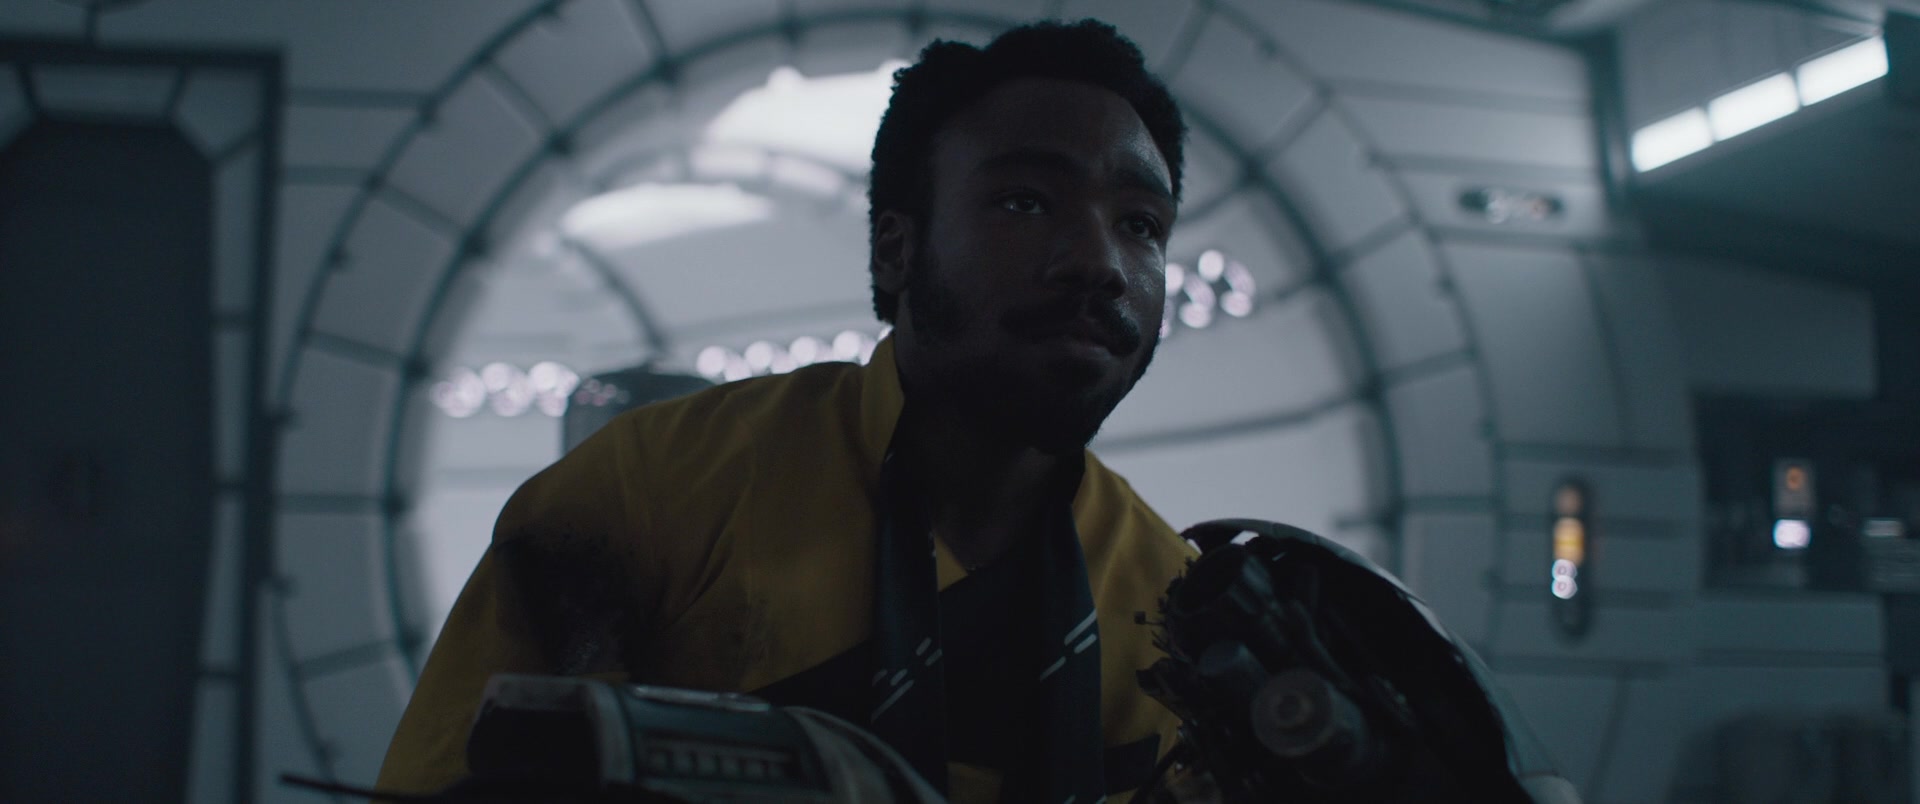 Lando Calrissian (Donald Glover) mourns the death of L3-37 (Phoebe Waller Bridge) in Solo: A Star Wars Story (2018), Lucasfilm